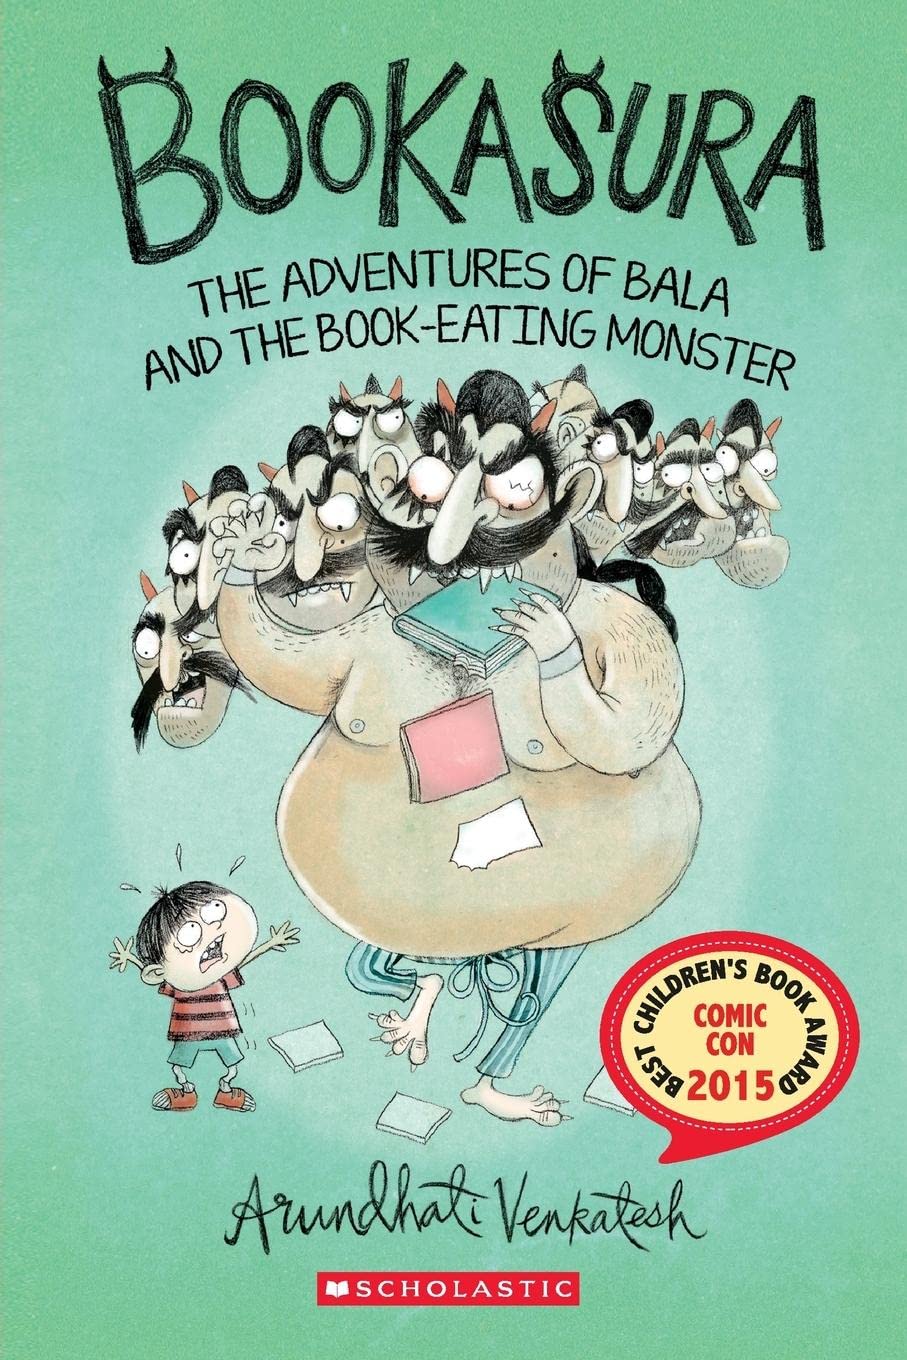 IMG : Bookasura- The adventures of Bala and the book eating Monster